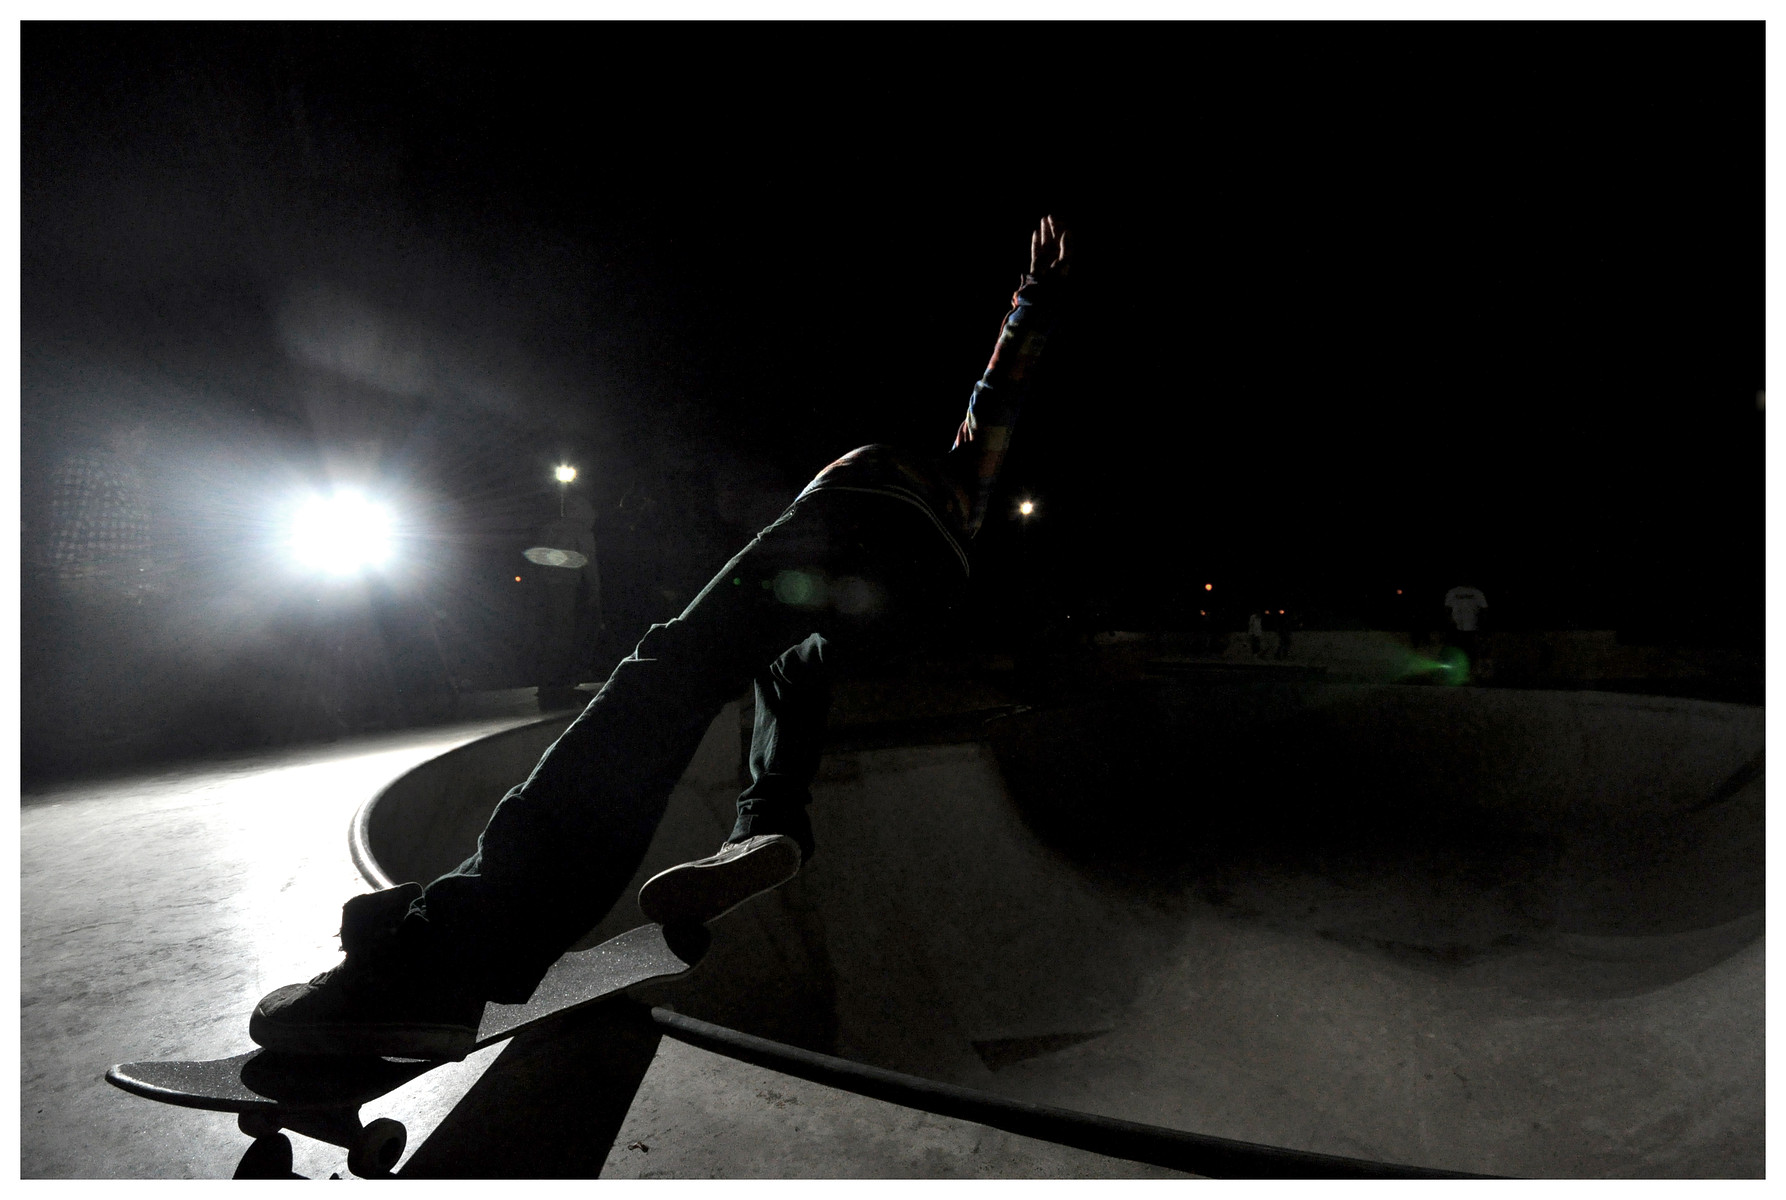 thom bleasdale photography | Gallery | skateboarding